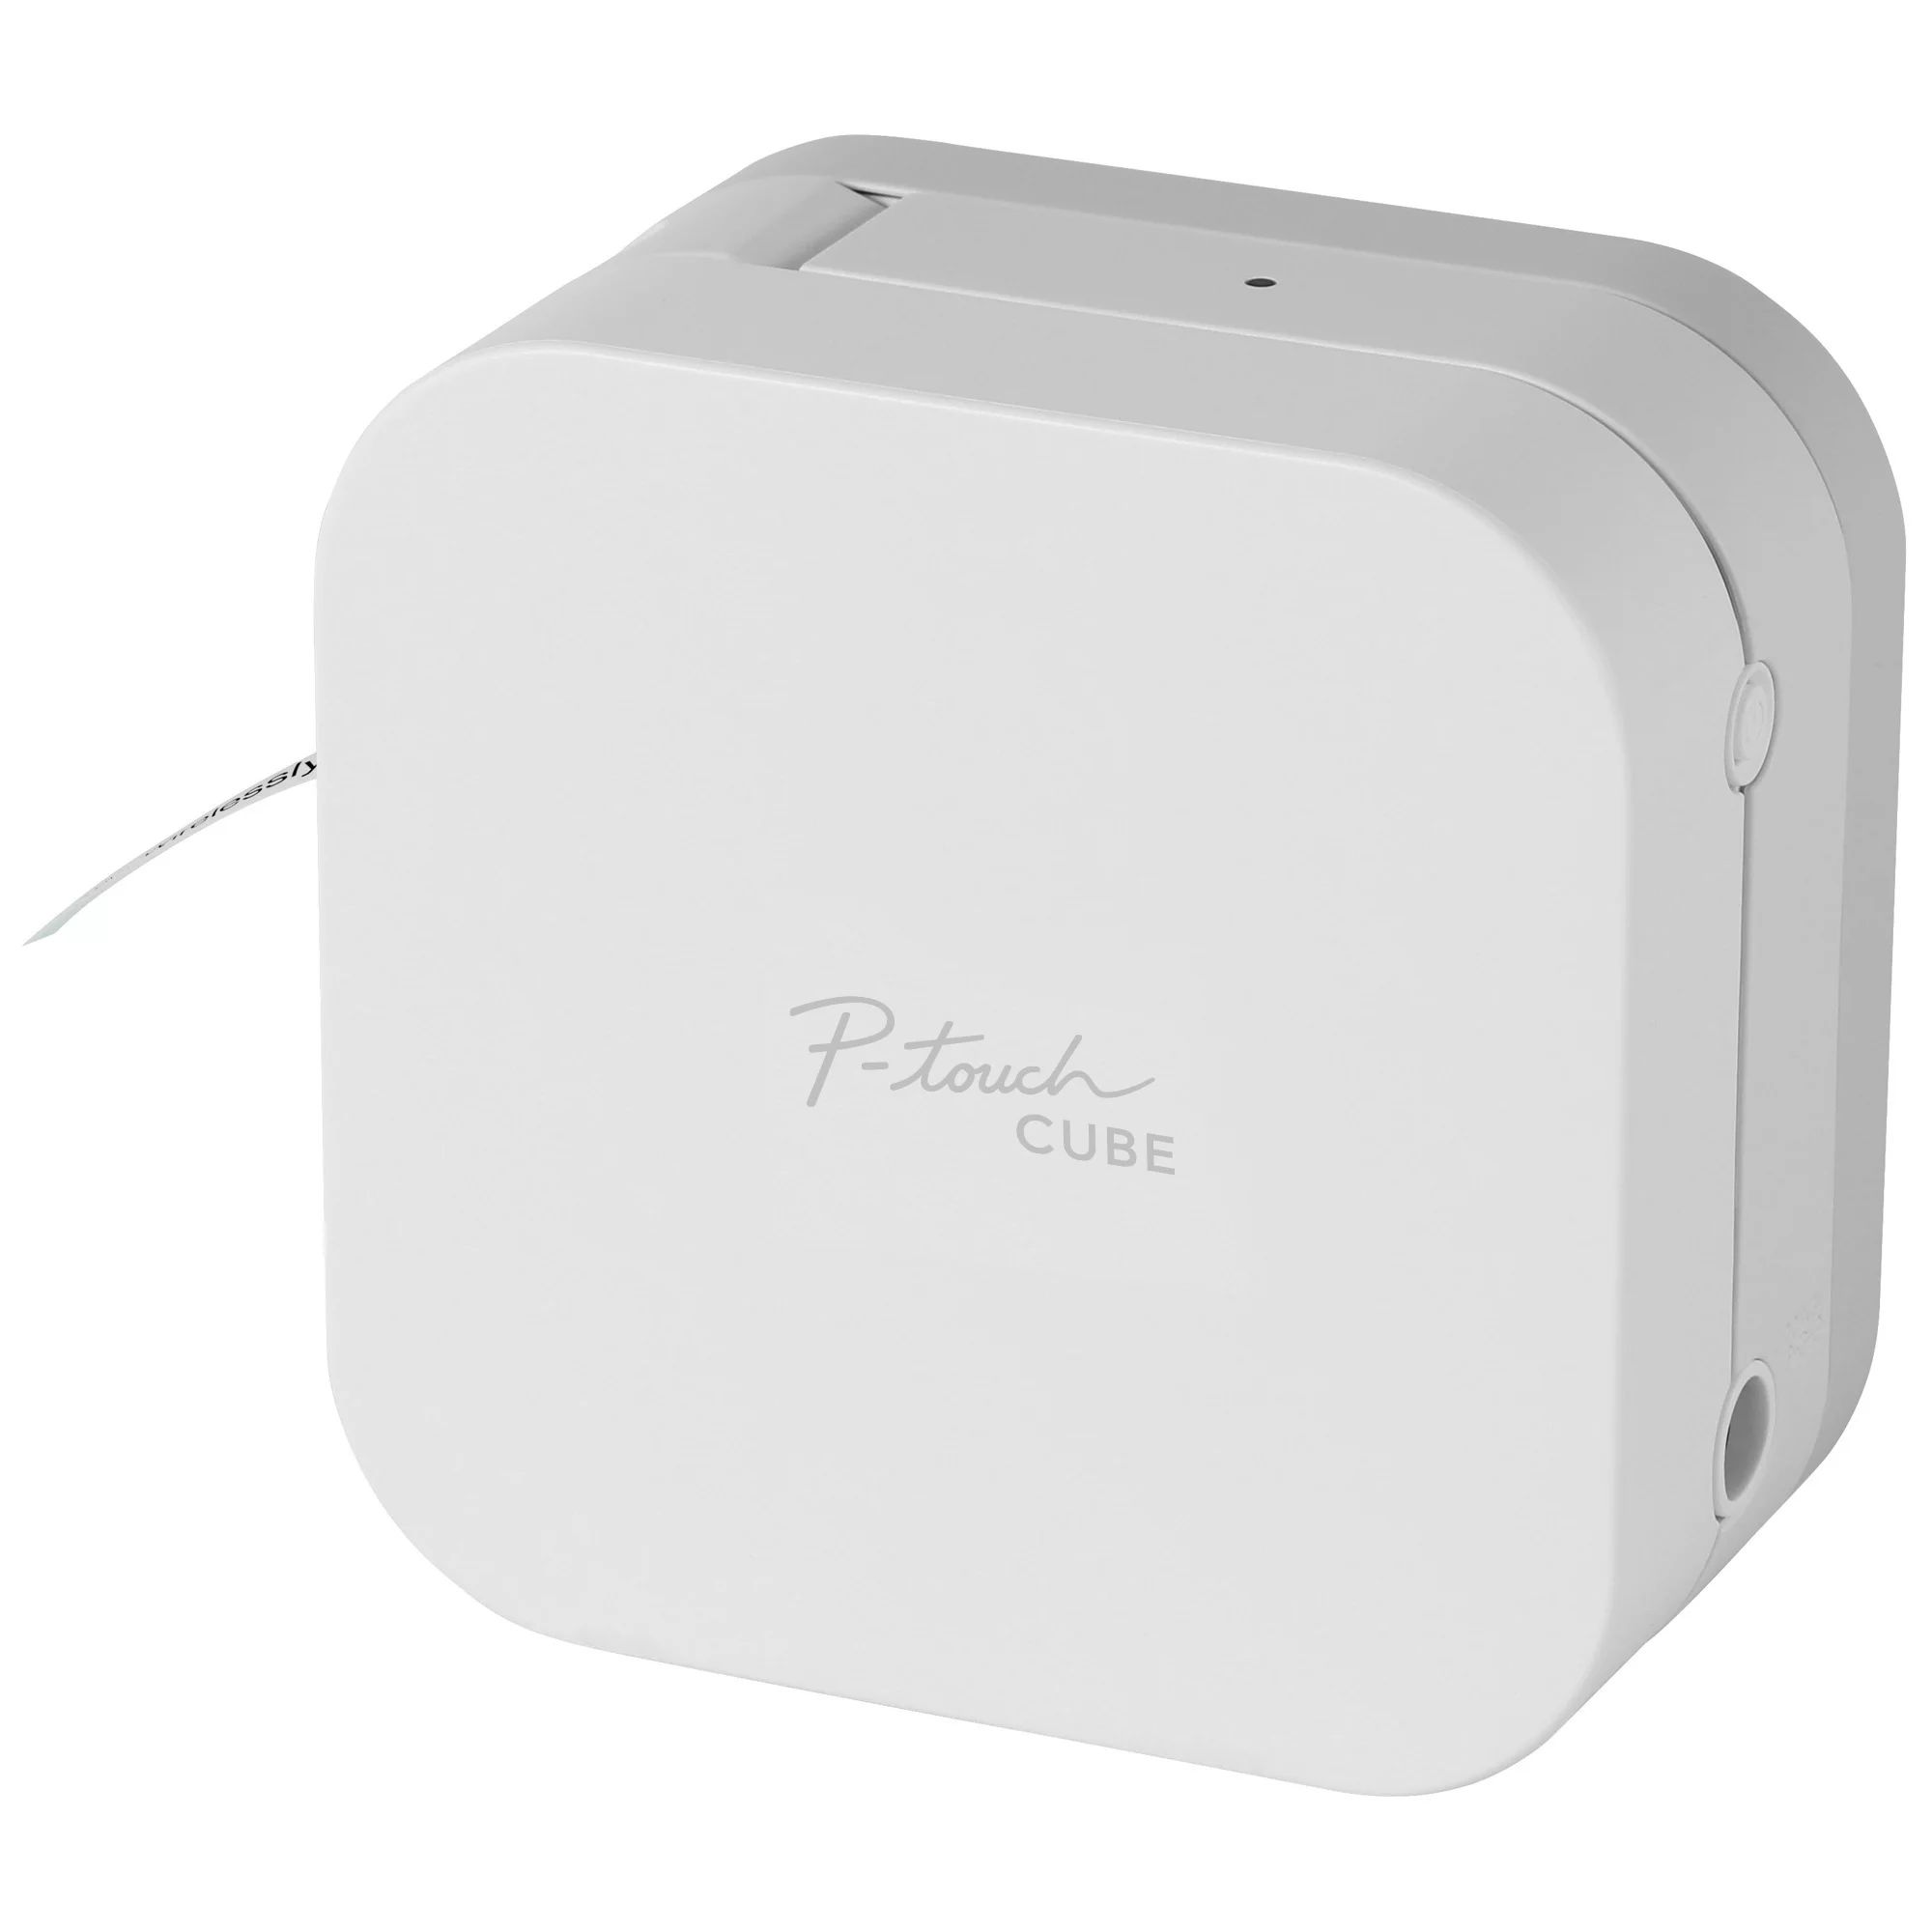 Brother P-Touch Cube Smartphone Label Maker, Bluetooth Wireless Technology - White | Walmart (US)